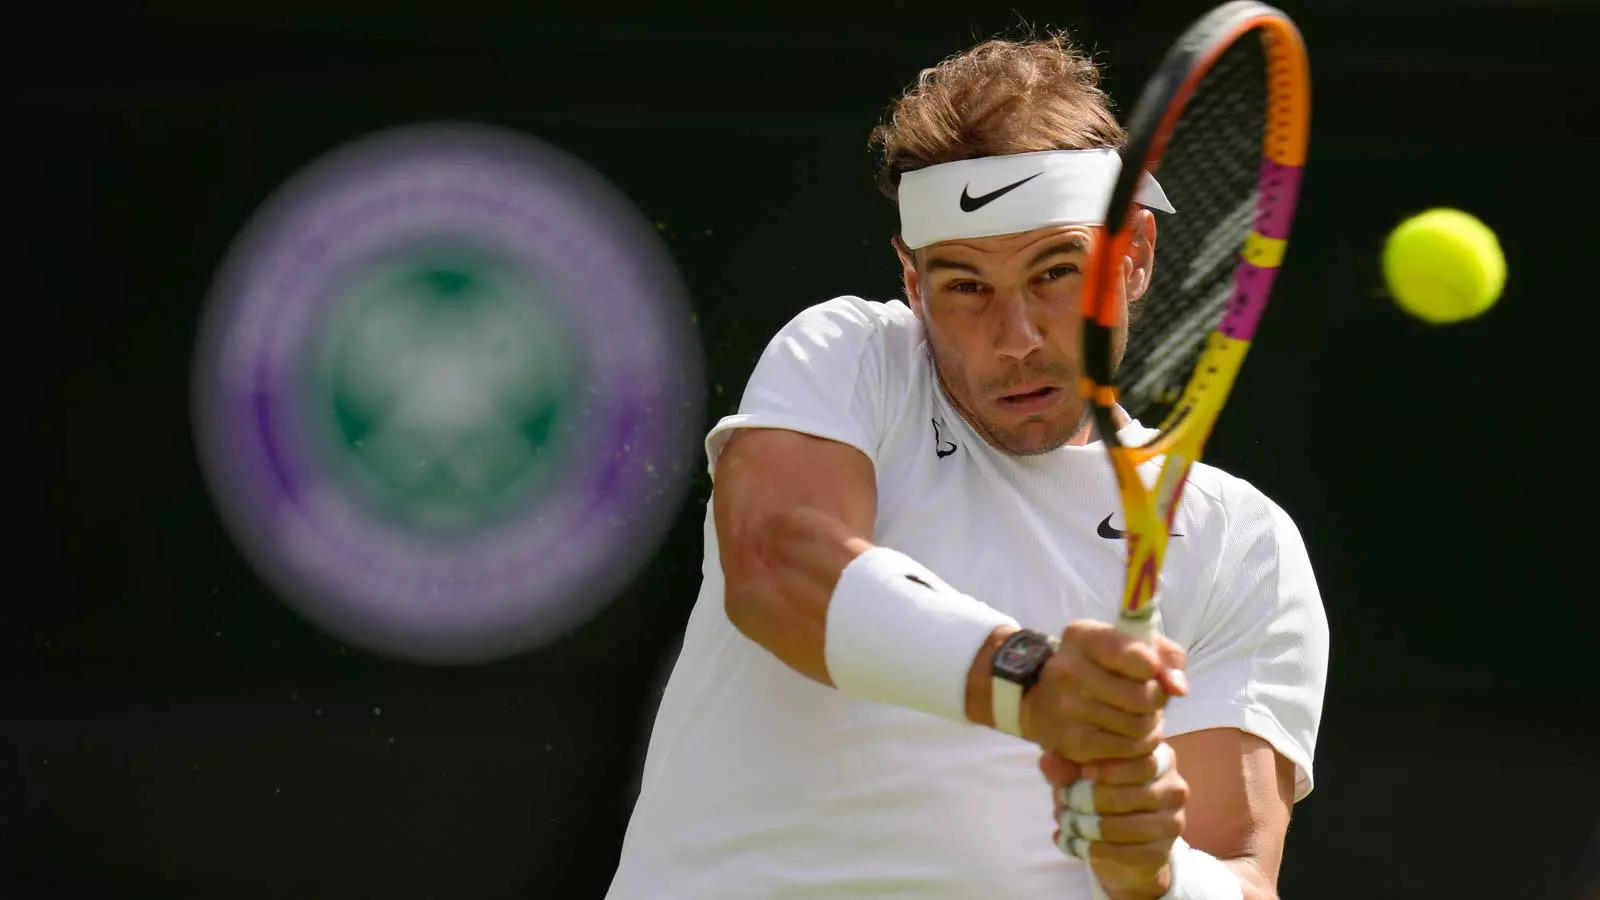 Rafael Nadal vs Lorenzo Sonego live streaming How to watch Wimbledon 2022 3rd round match online